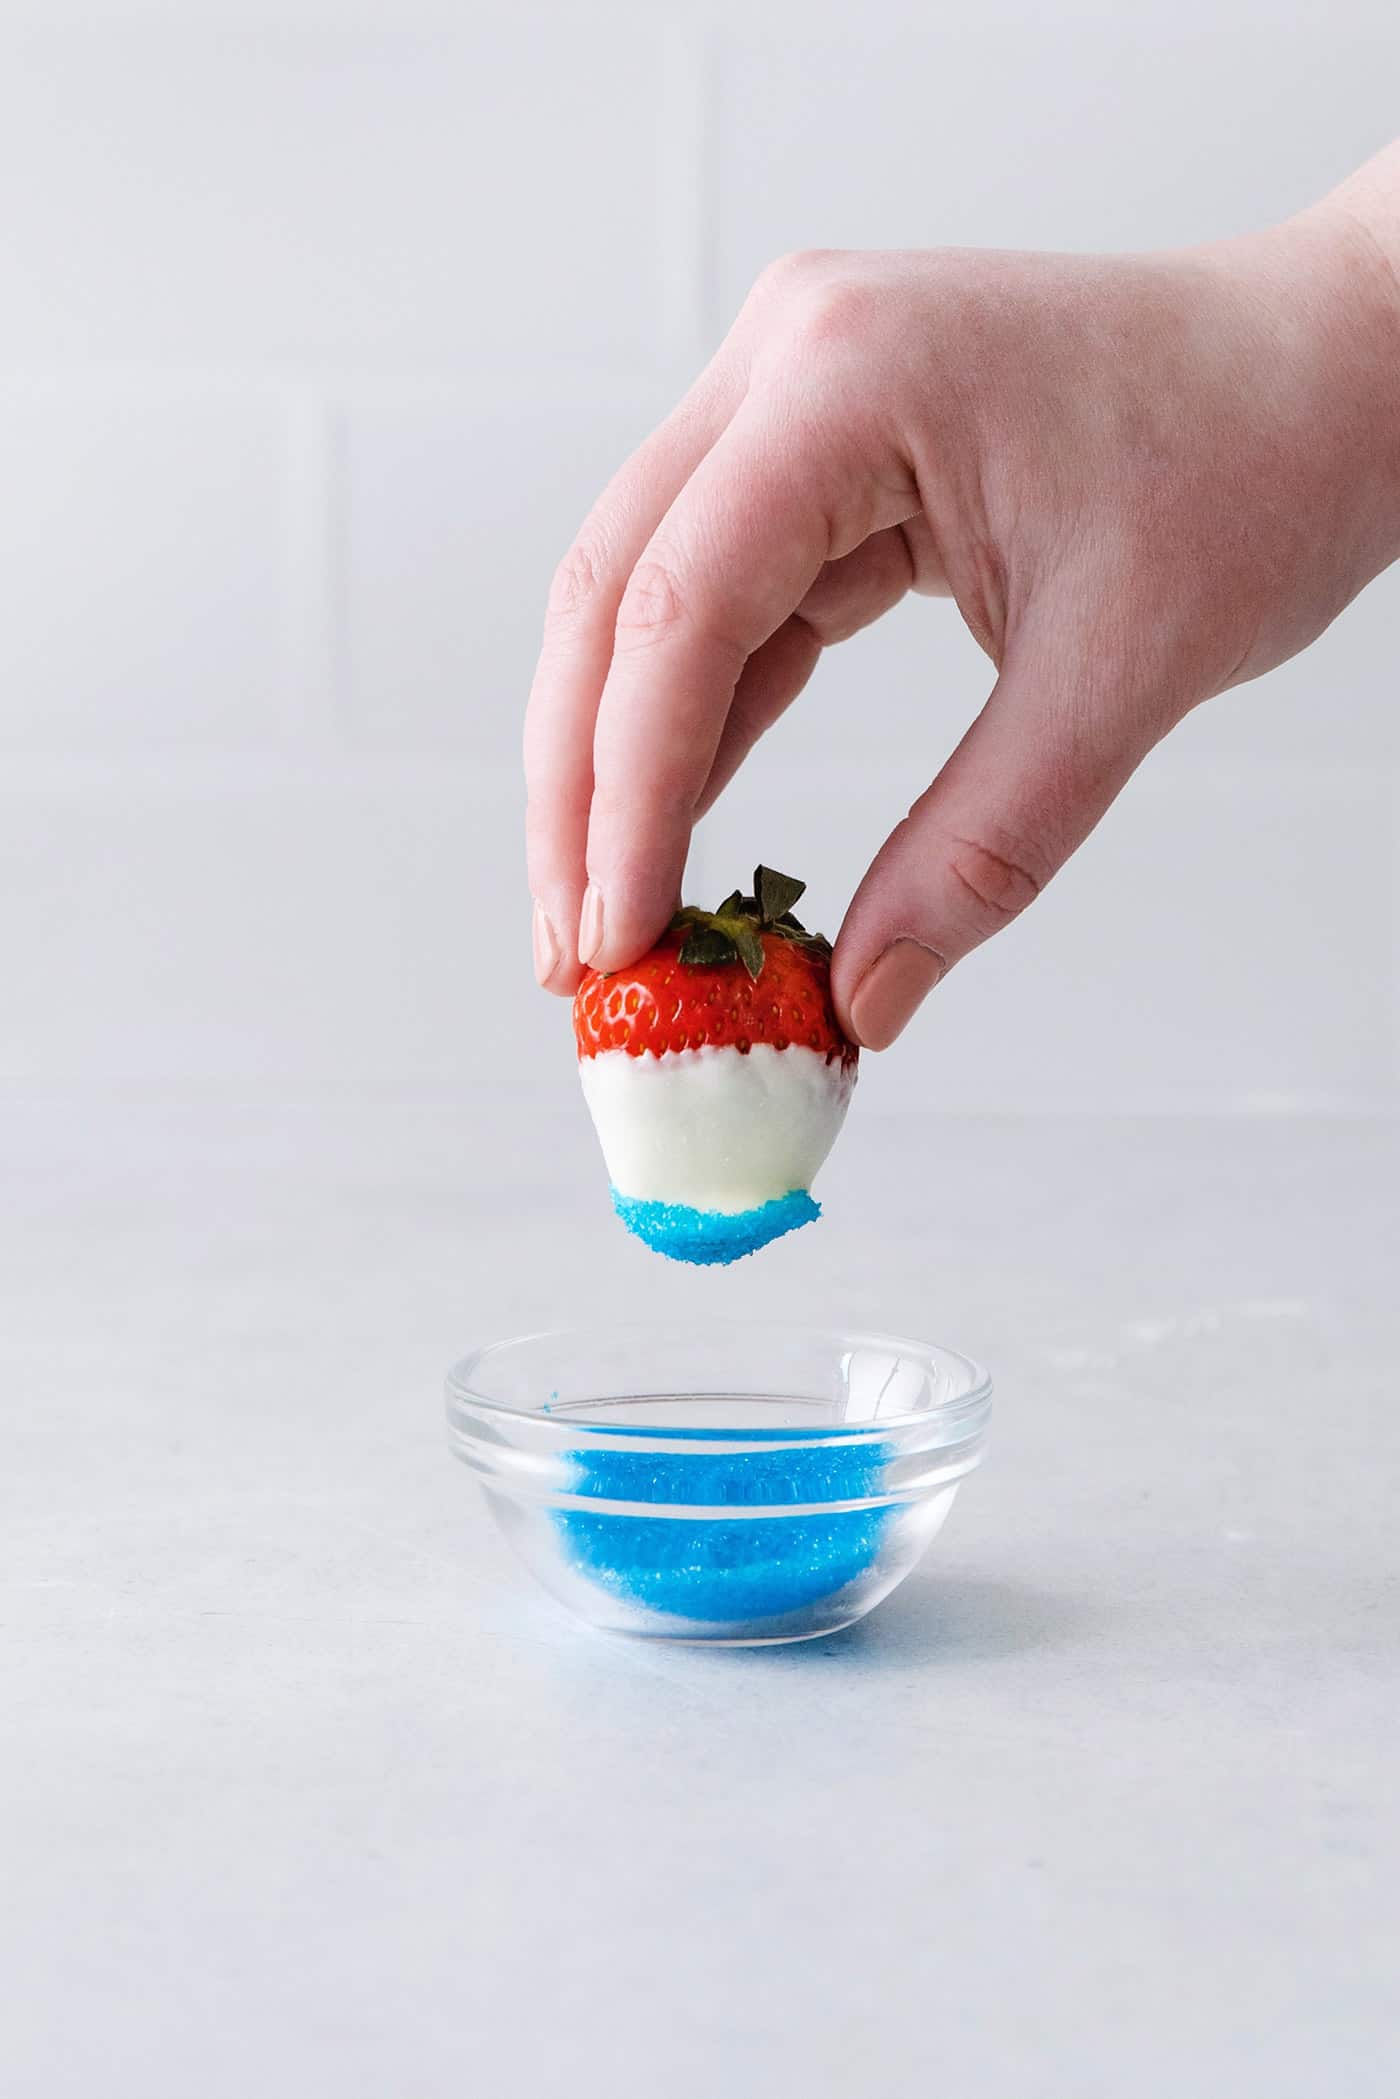 A hand holding a strawberry dipped in blue sugar